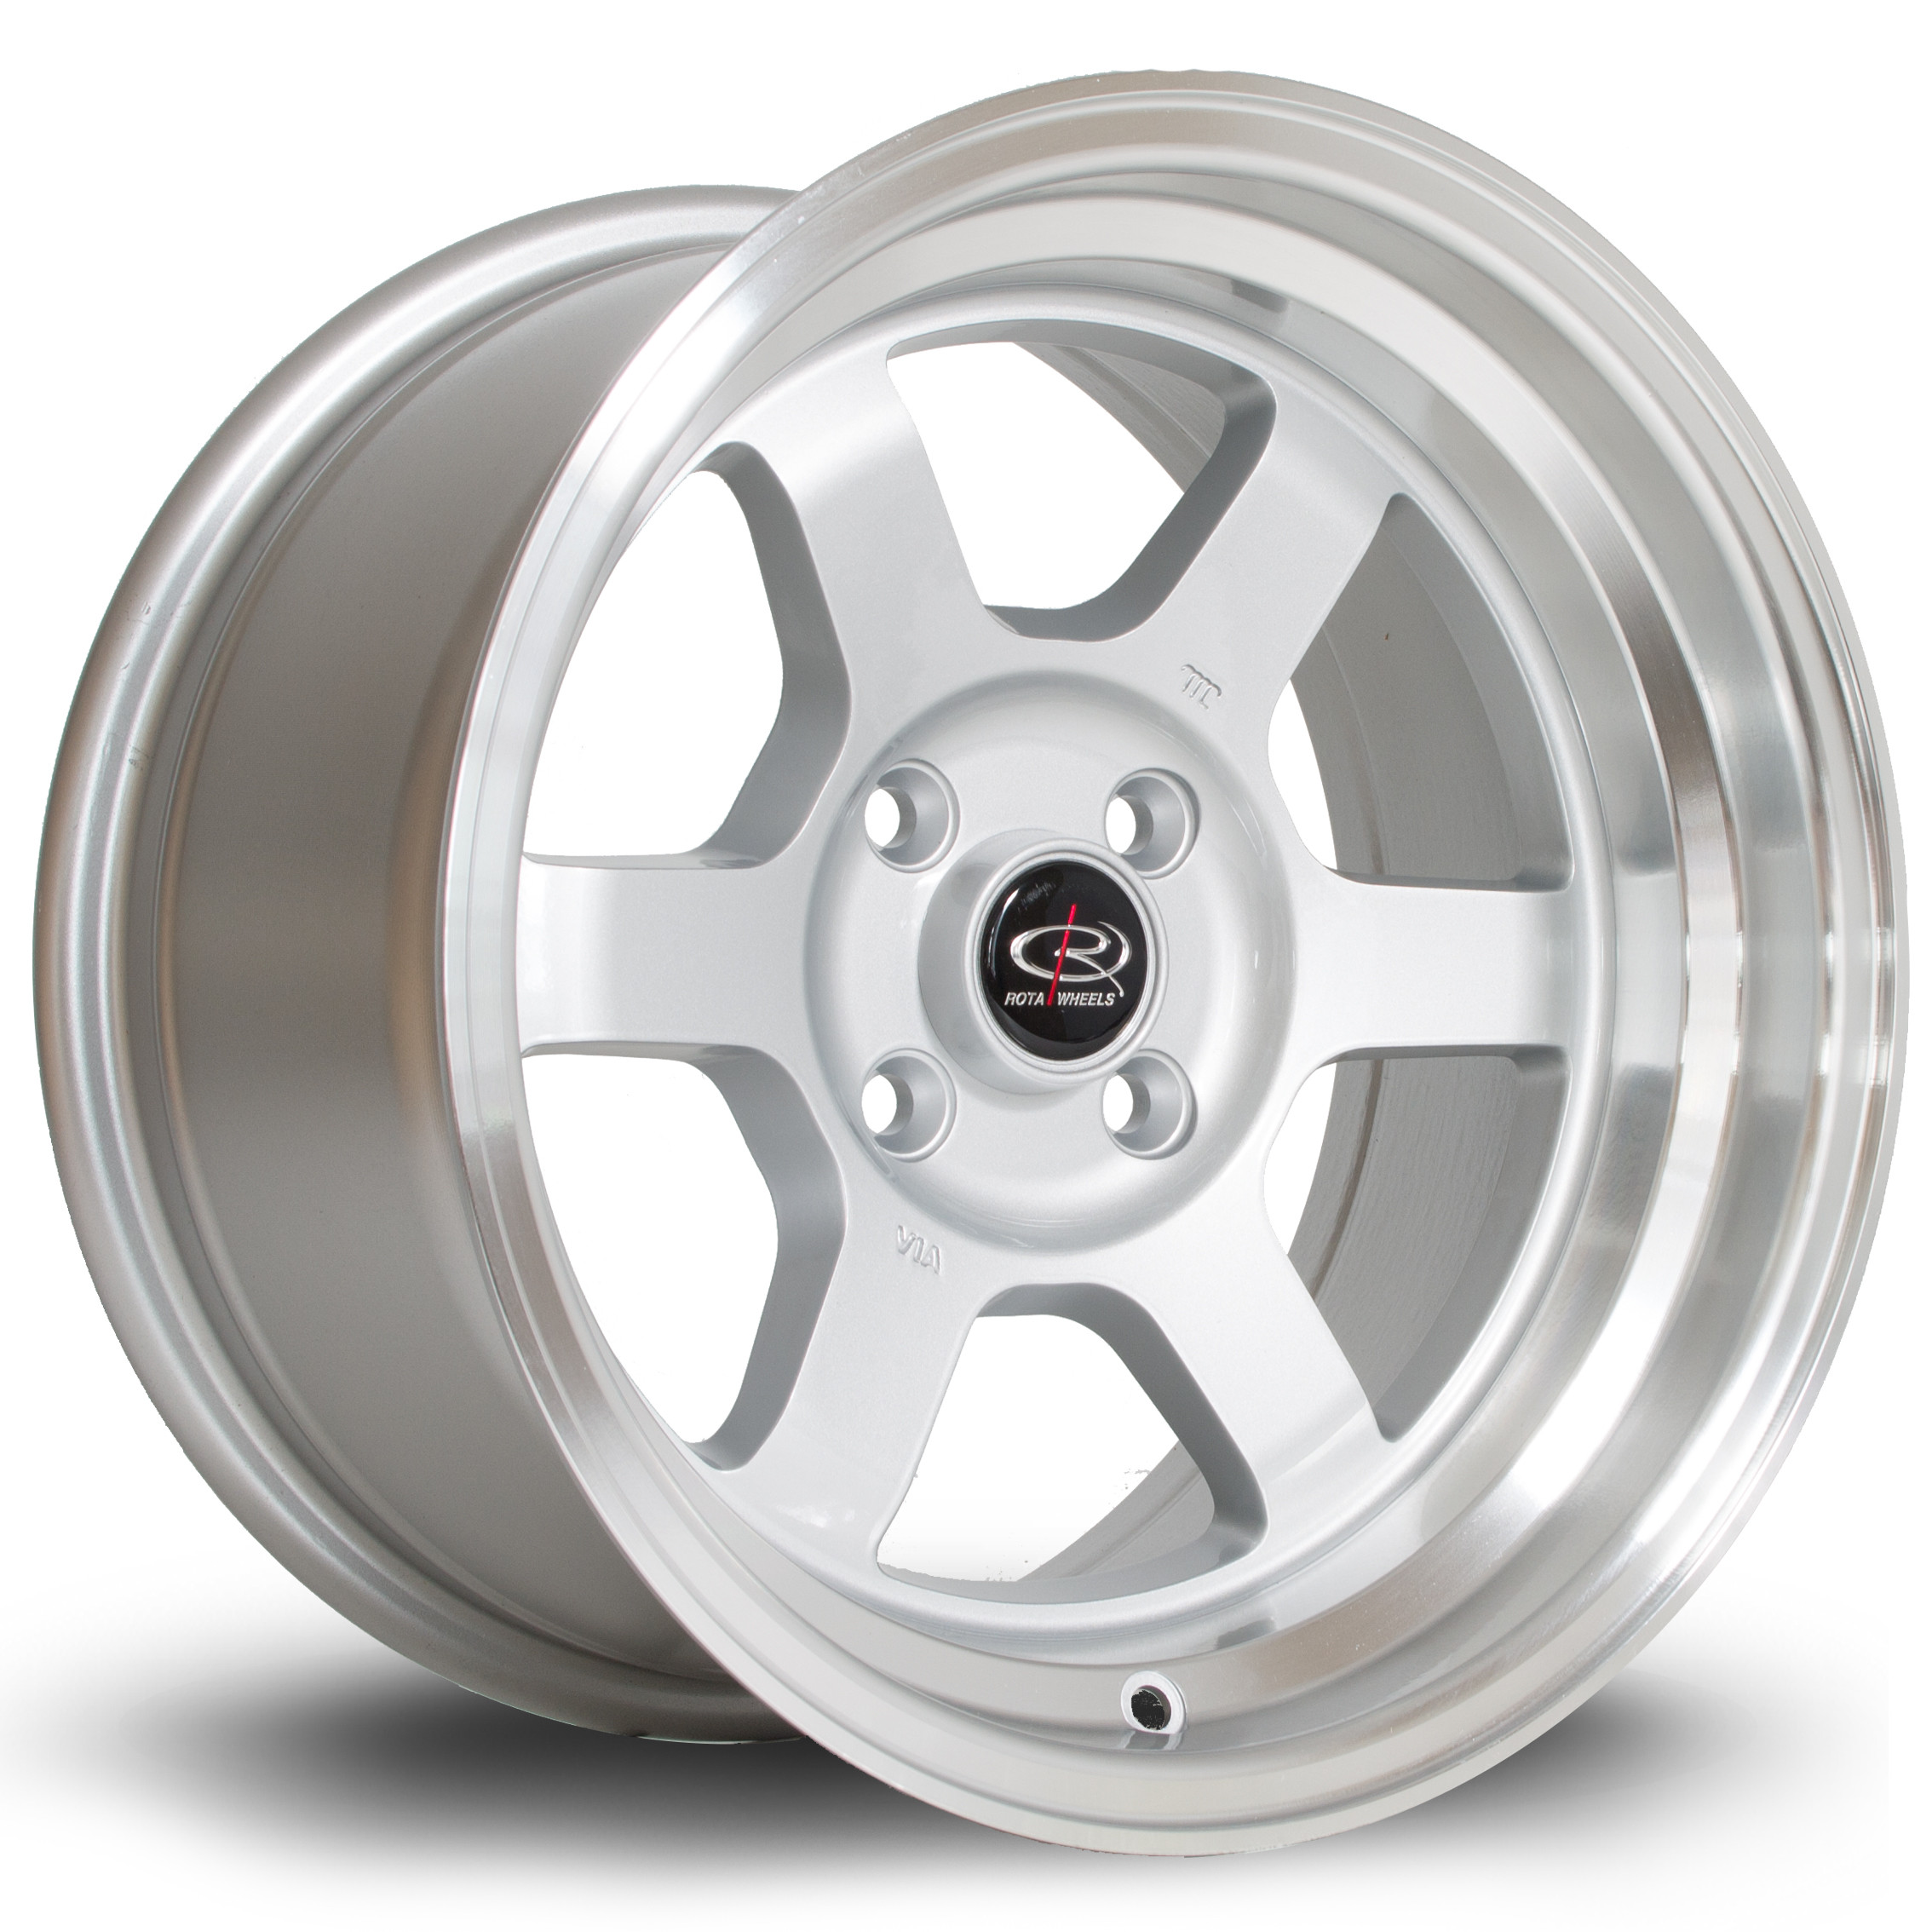 Grid-V 15x8 4x114 ET0 Silver with Polished Lip